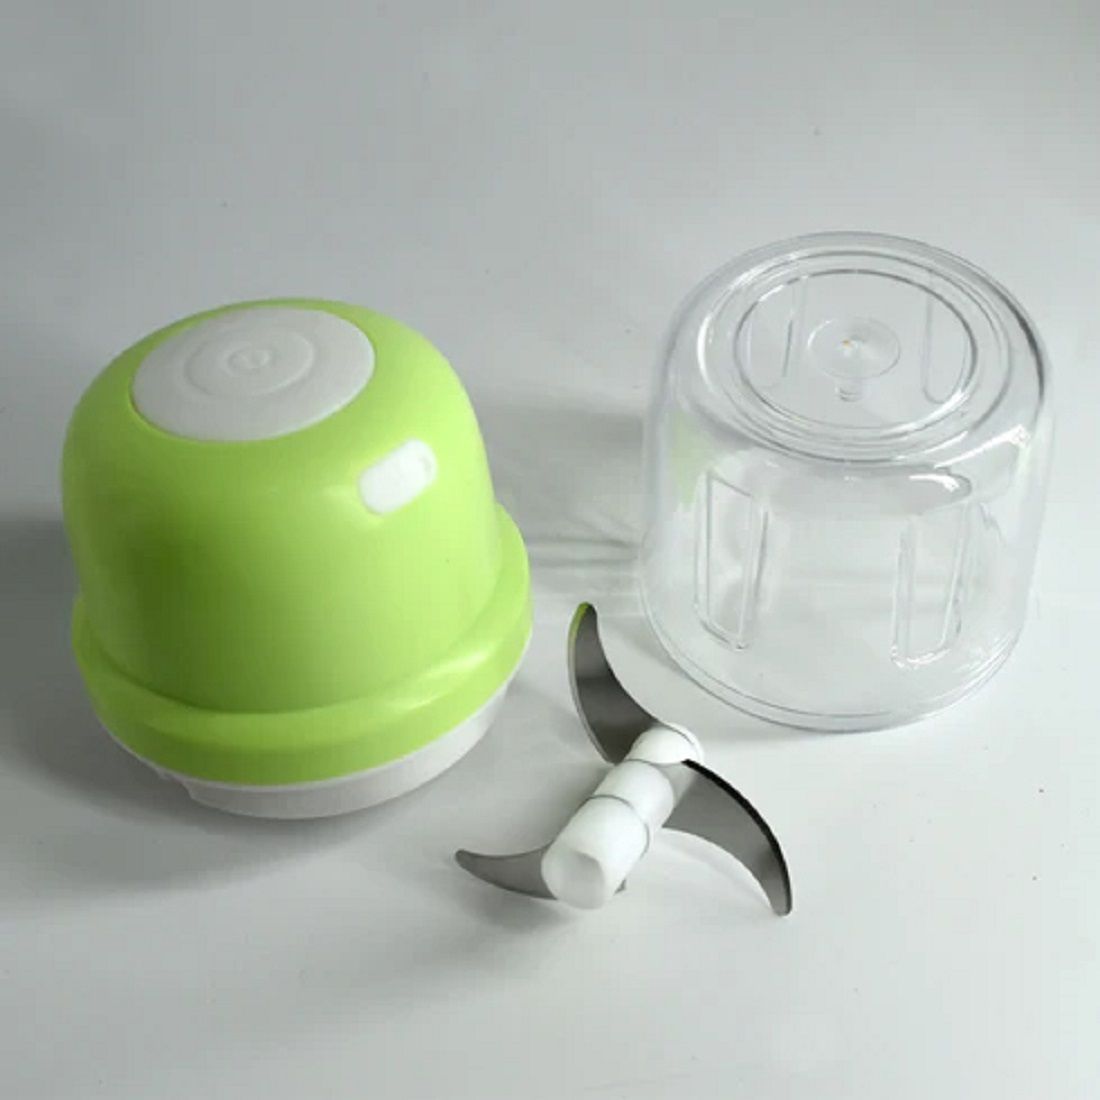 Usb Rechargeable Electric Chopper